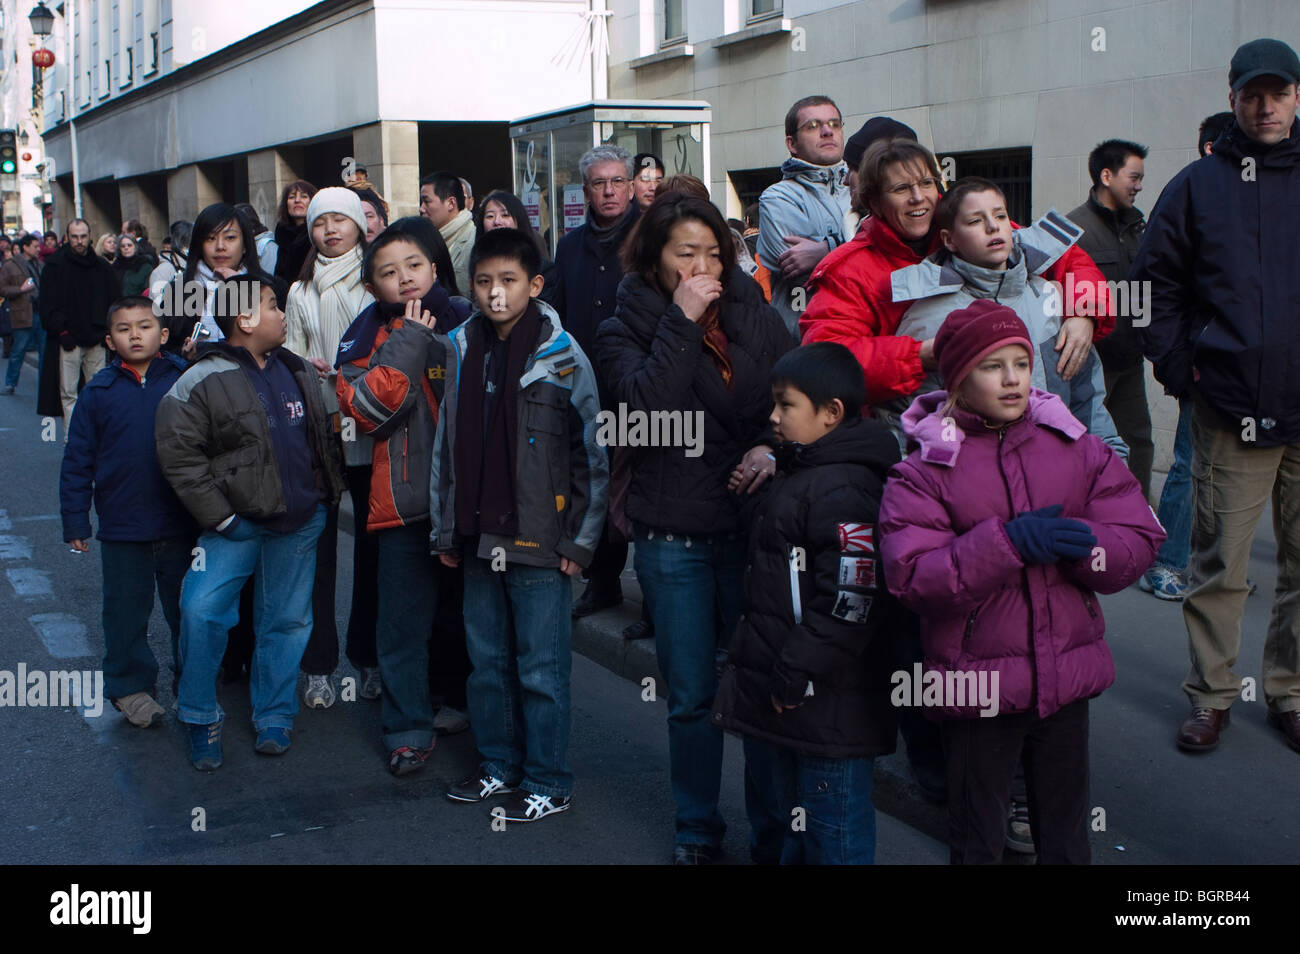 Paris, France, Large Crowd People, Street Scene, Chinatown, Young Asian immigrants minority family Watching pa-rade at 'Chinese New Year' Celebrations, immigrants Europe, chinese crowd faces Stock Photo